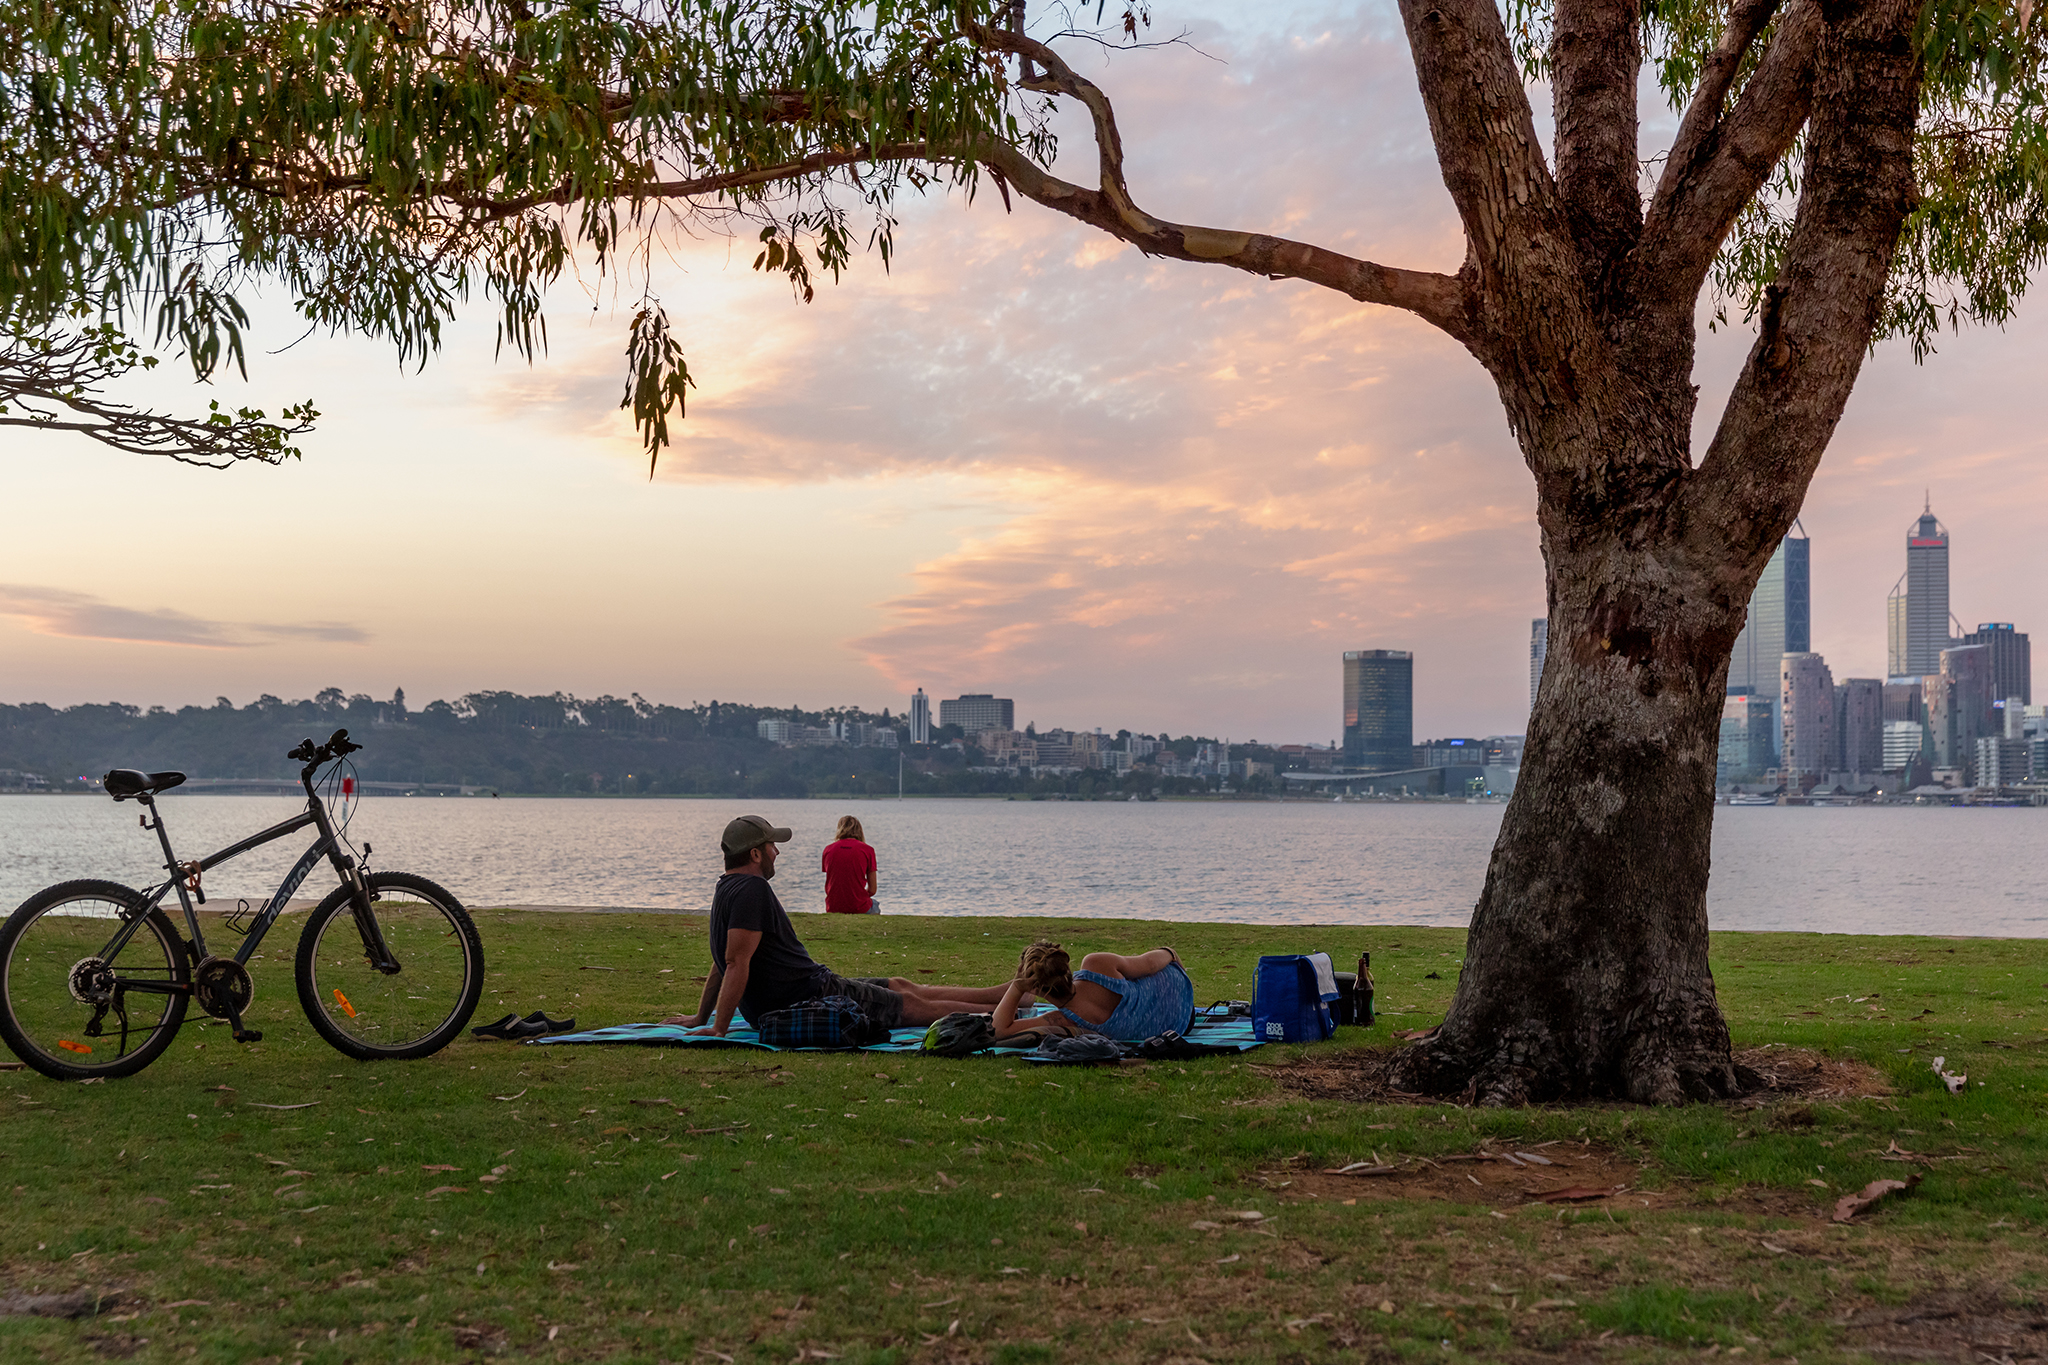 Person on picnic rug with bike next to them looking at the city skyline from South Perth foreshore